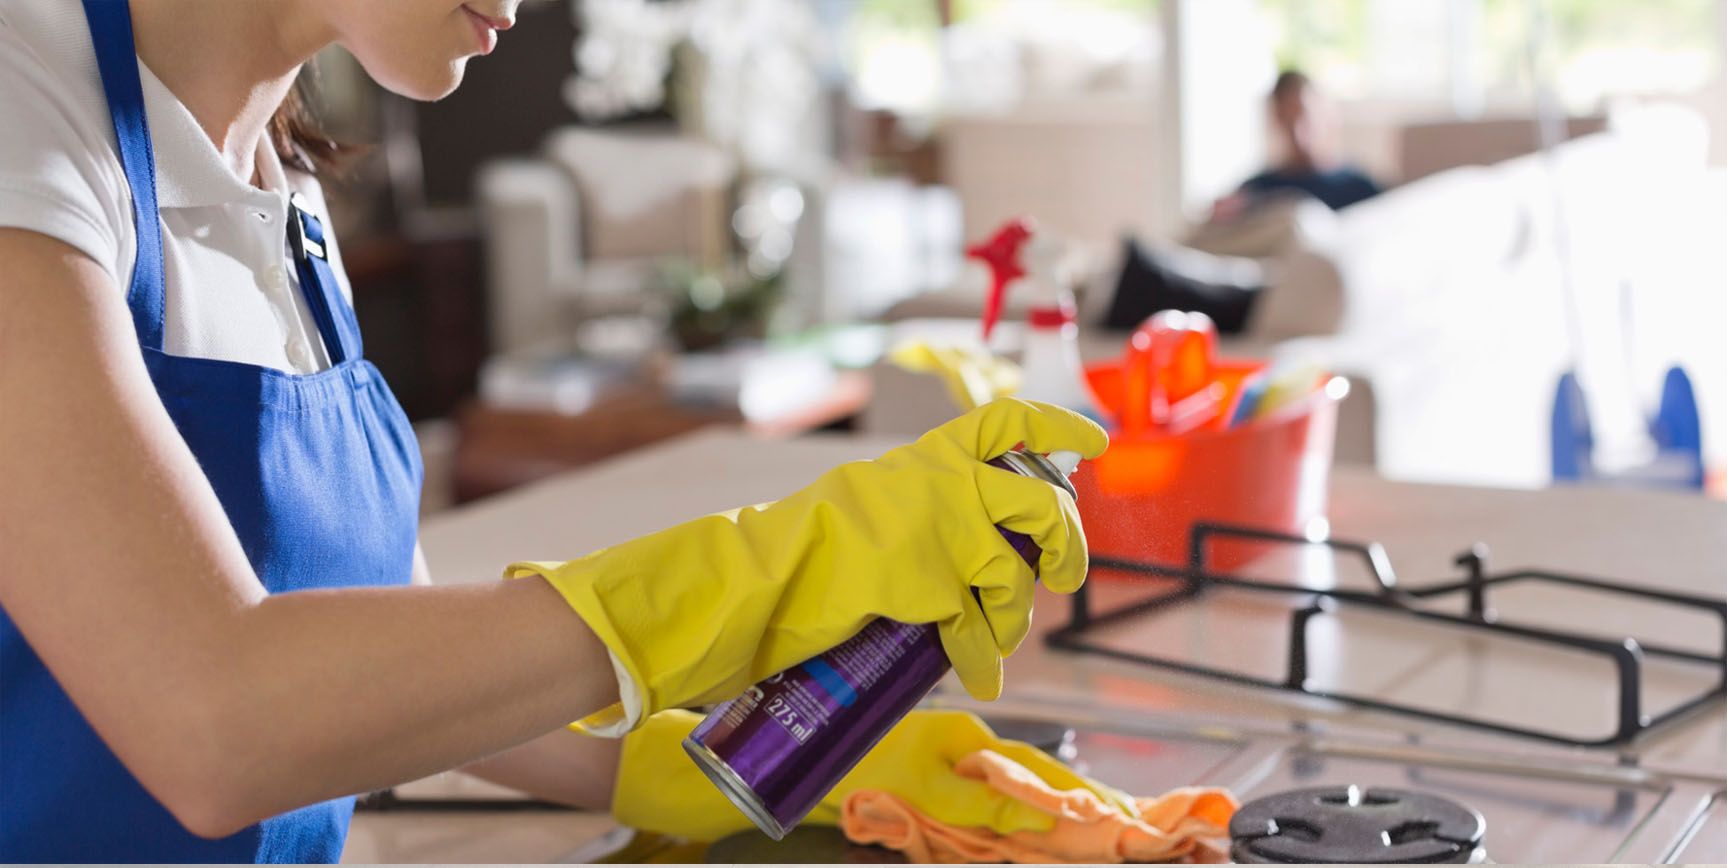 Maid Services: A Guide to Quality Cleaning and Affordable Prices